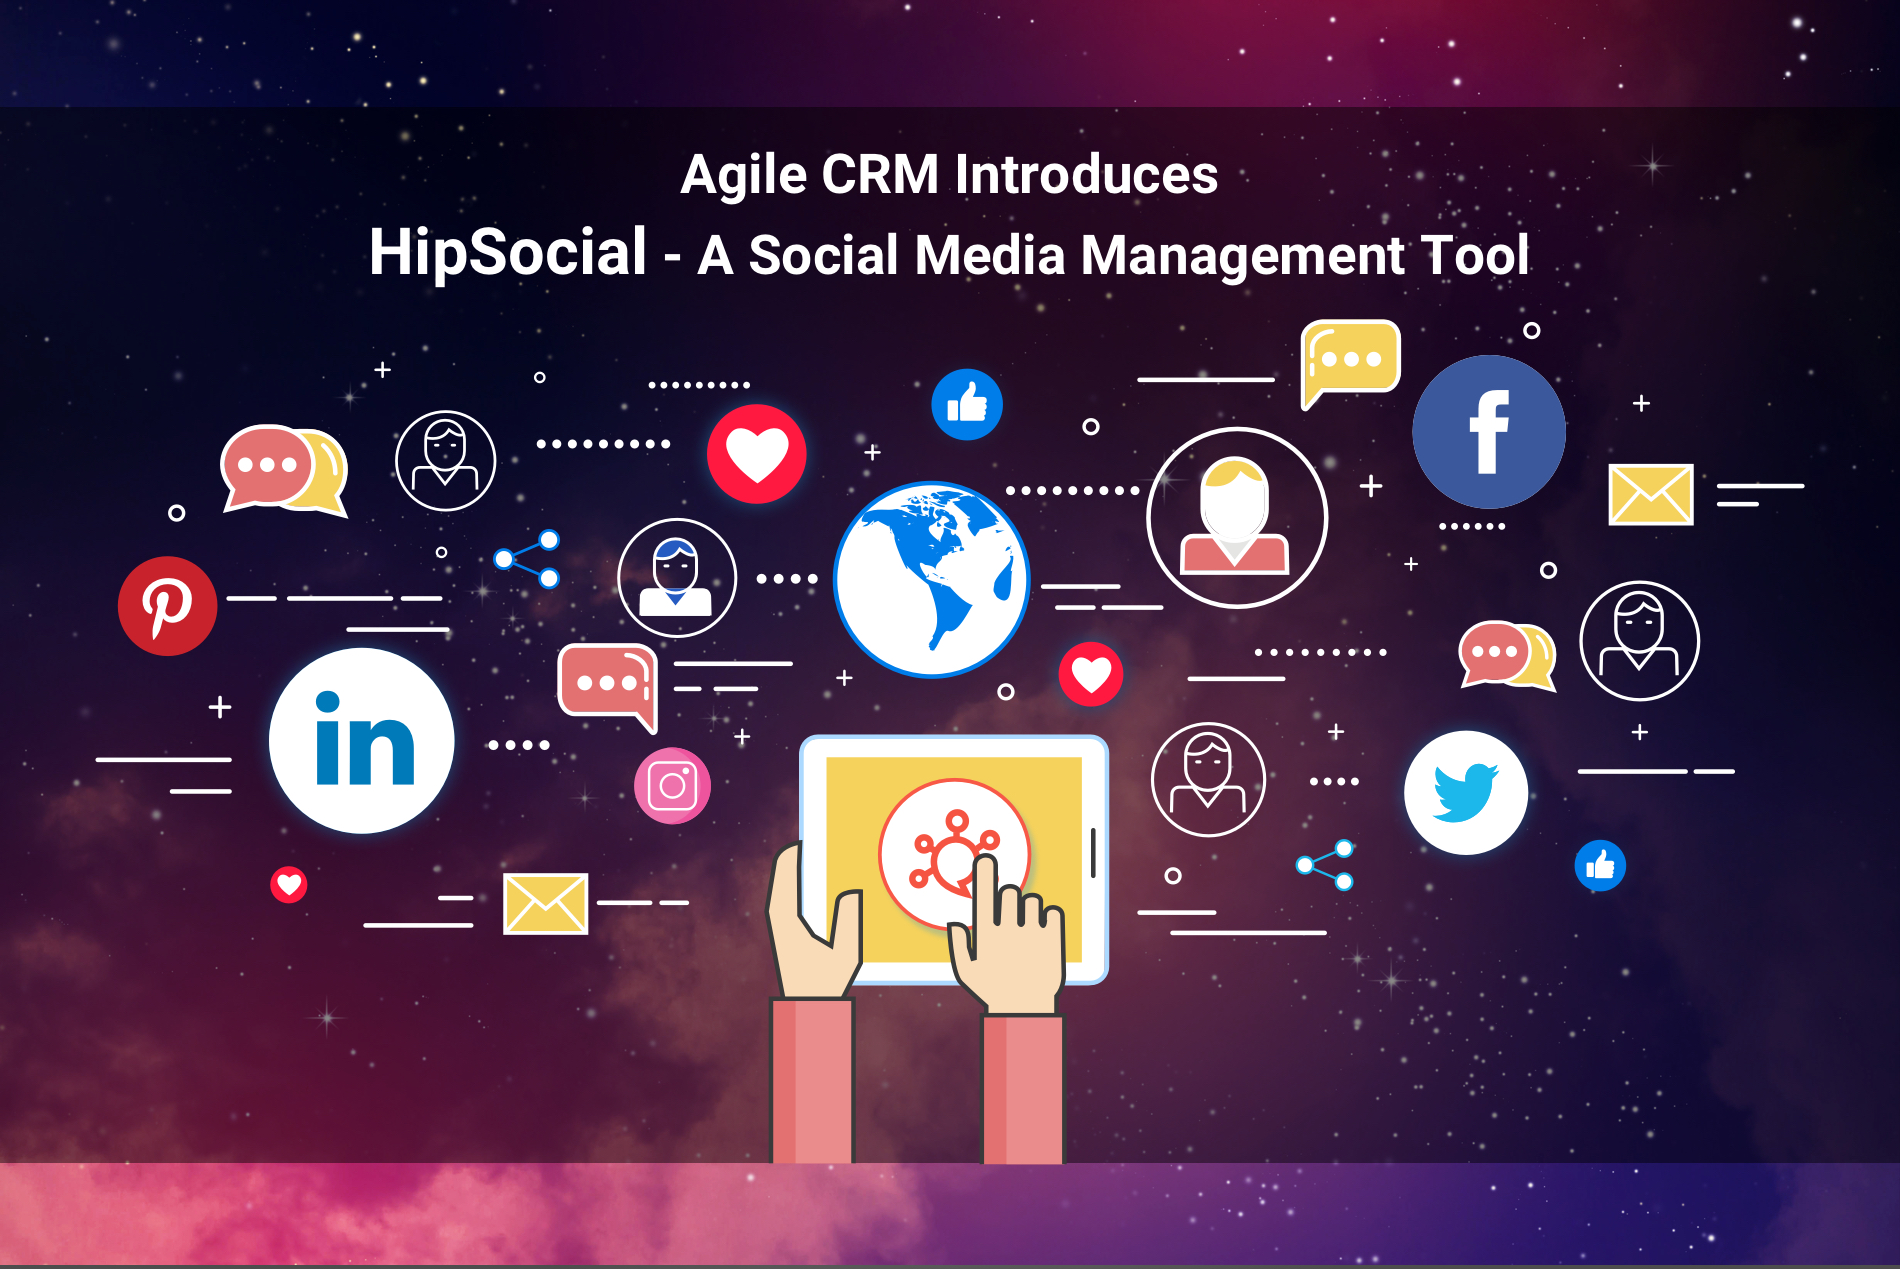 Our Full-Fledged Social Media Management Tool That We Built For You – Here’s Why